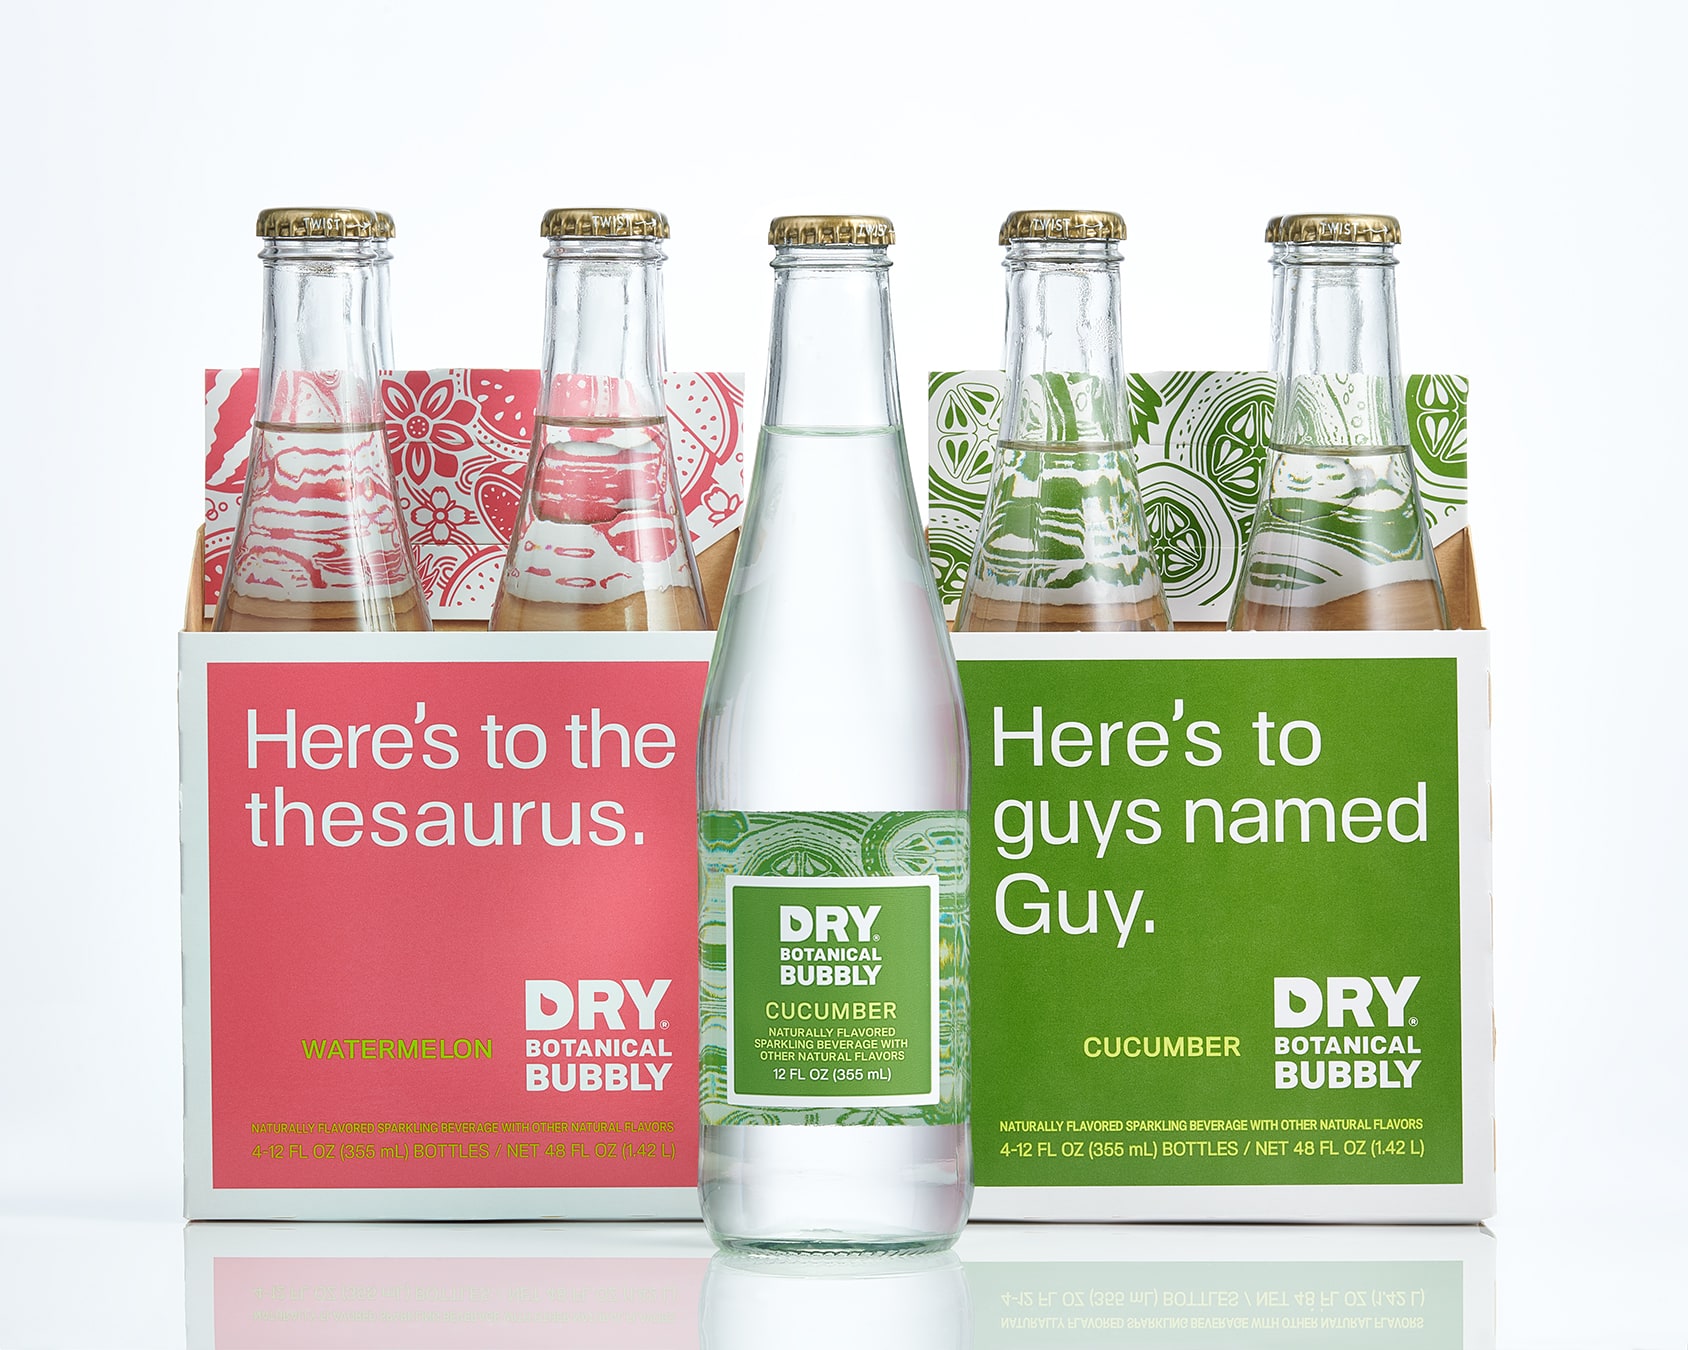 Dry Botanical Bubbly package design Watermelon and Cucumber flavors